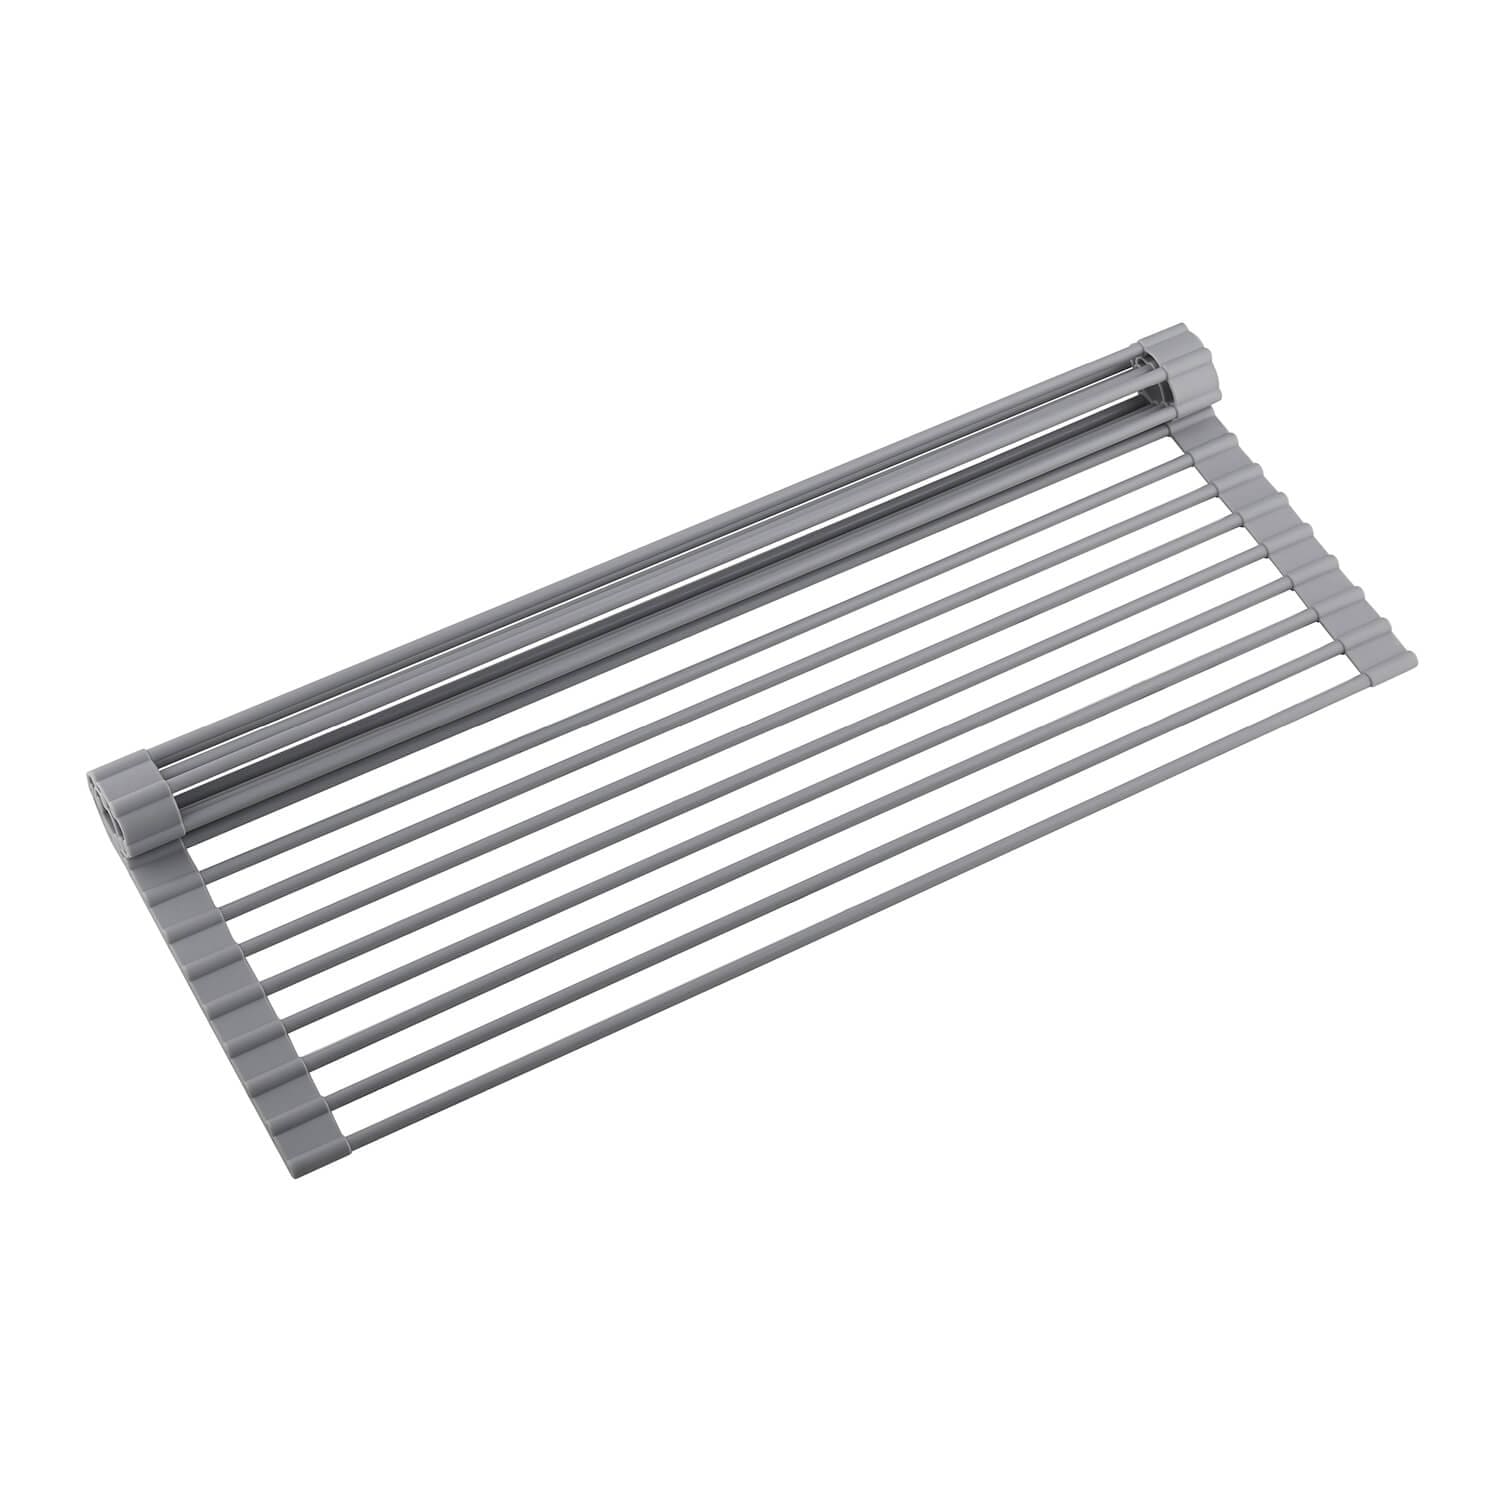 https://ak1.ostkcdn.com/images/products/is/images/direct/5570648d80340e5ce5030e6da31c28c08d4e8cb6/Multipurpose-Stainless-Steel-Roll-Up-Drain-Tray.jpg